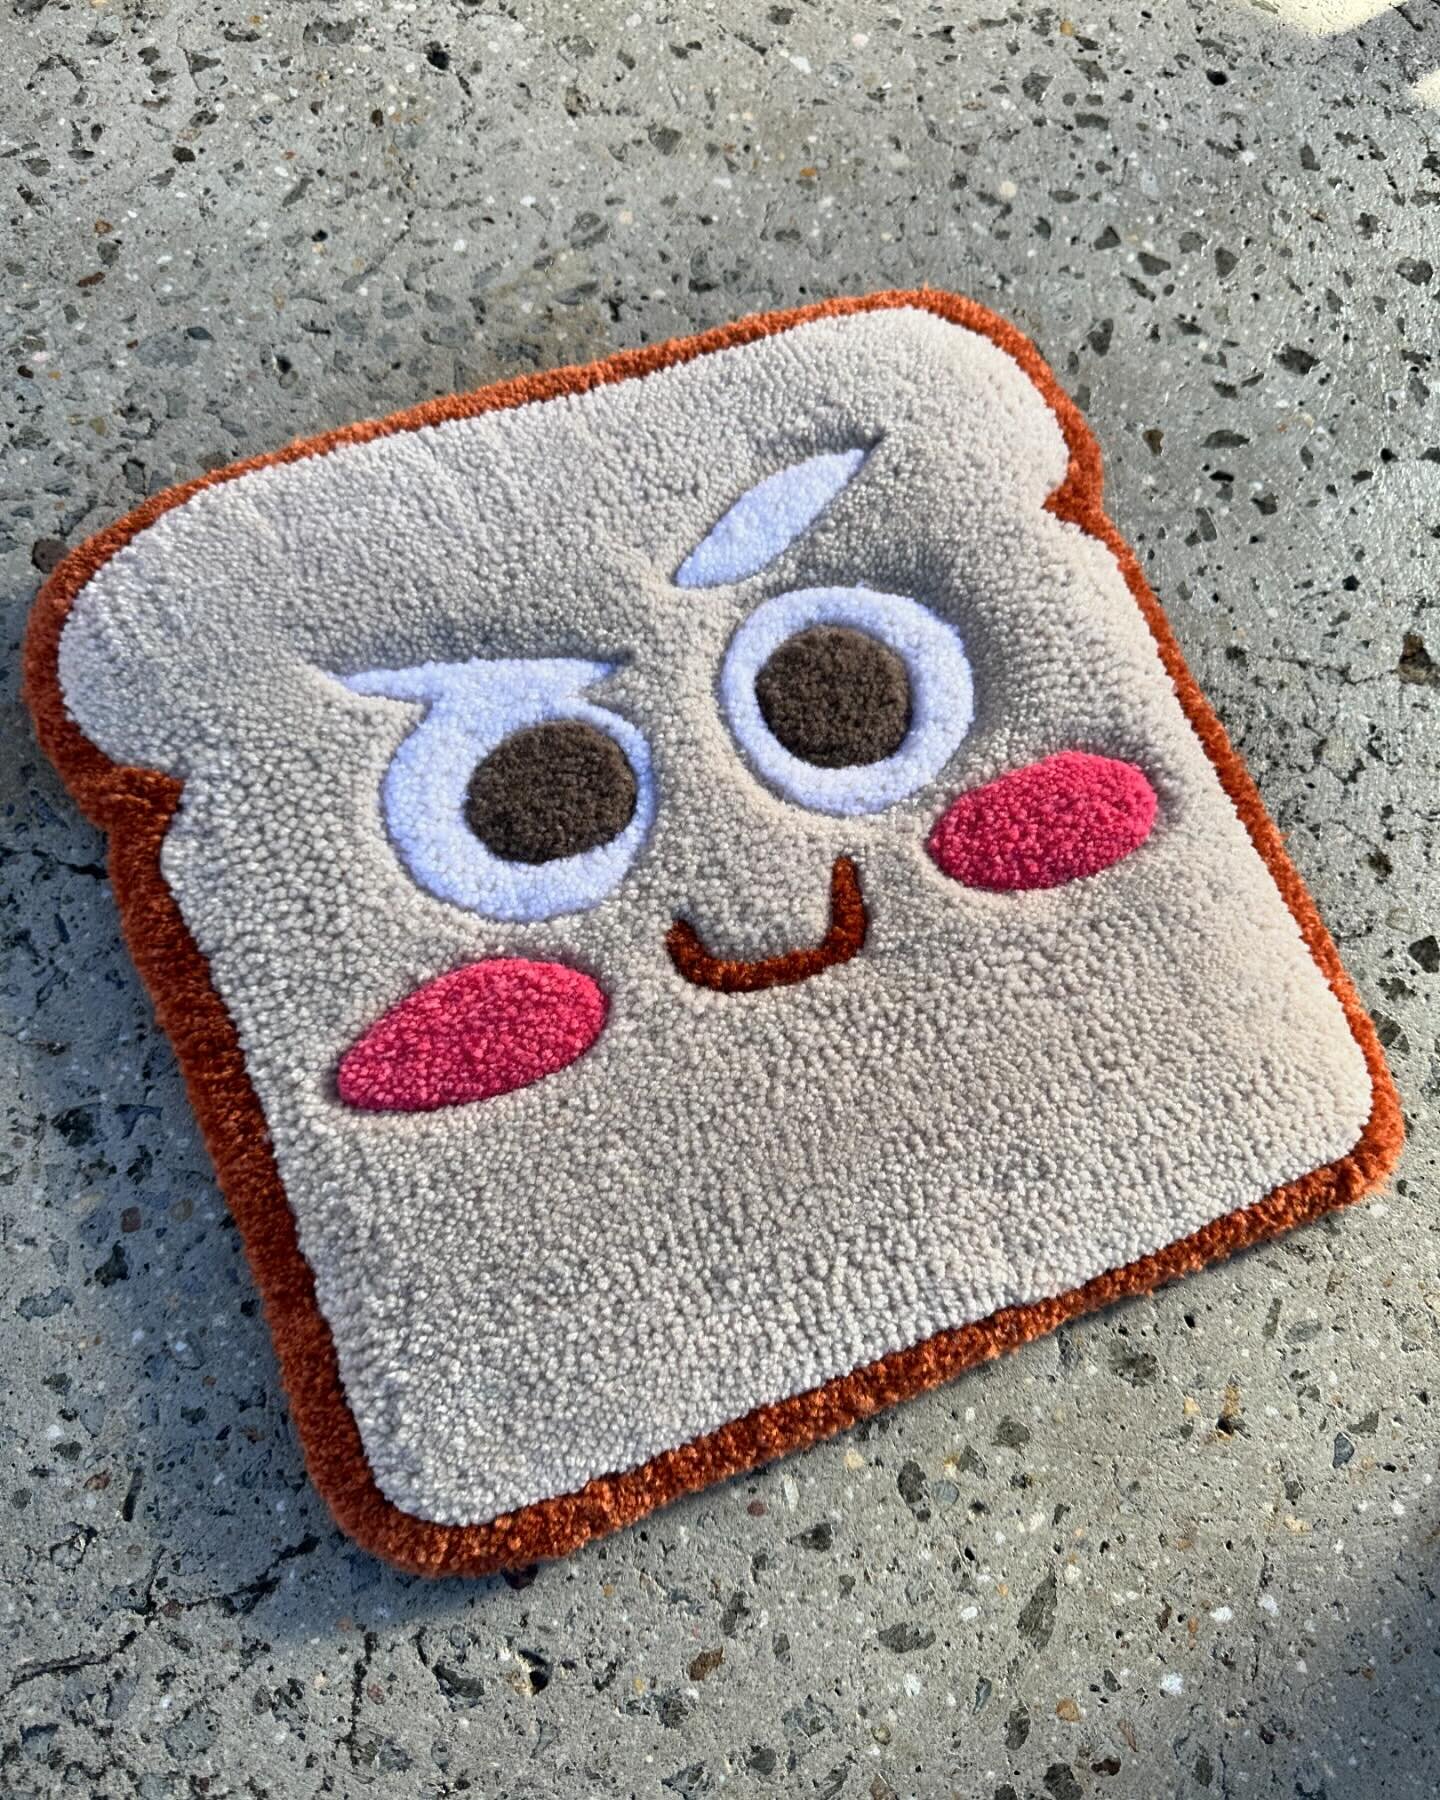 you&rsquo;re TOAST mate! 🍞

original design made with acrylic and aussie wool yarn 🧶 

love my lil guy so much, made him for @smashcon last year and the person who bought him also got a lucky egg 🍳 and asked why i hadn&rsquo;t made any bacon? 🥓 
